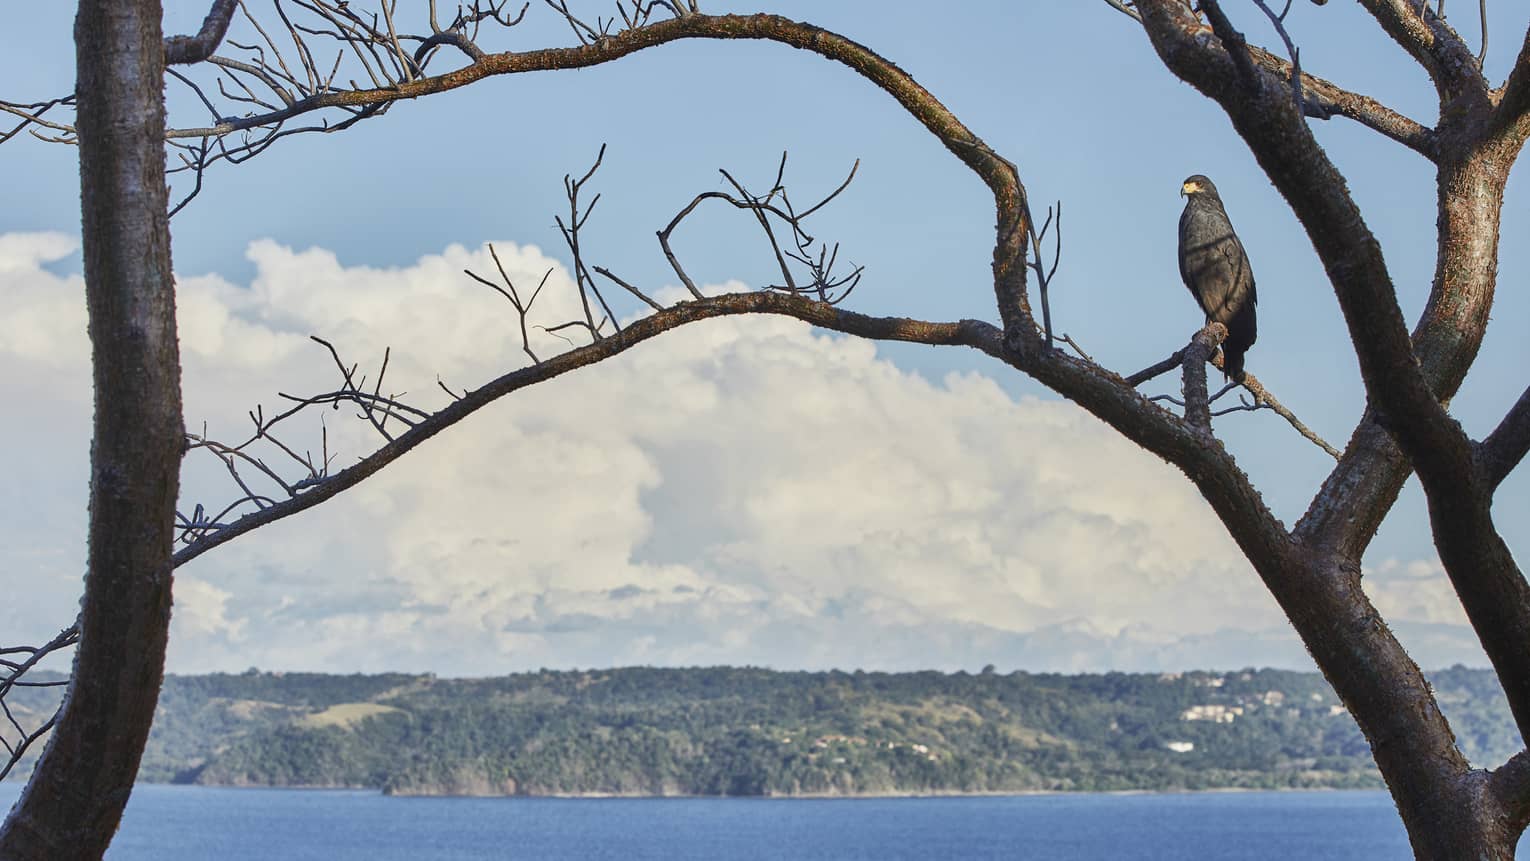 Large bird perched on a bare tree branch overlooking the bay